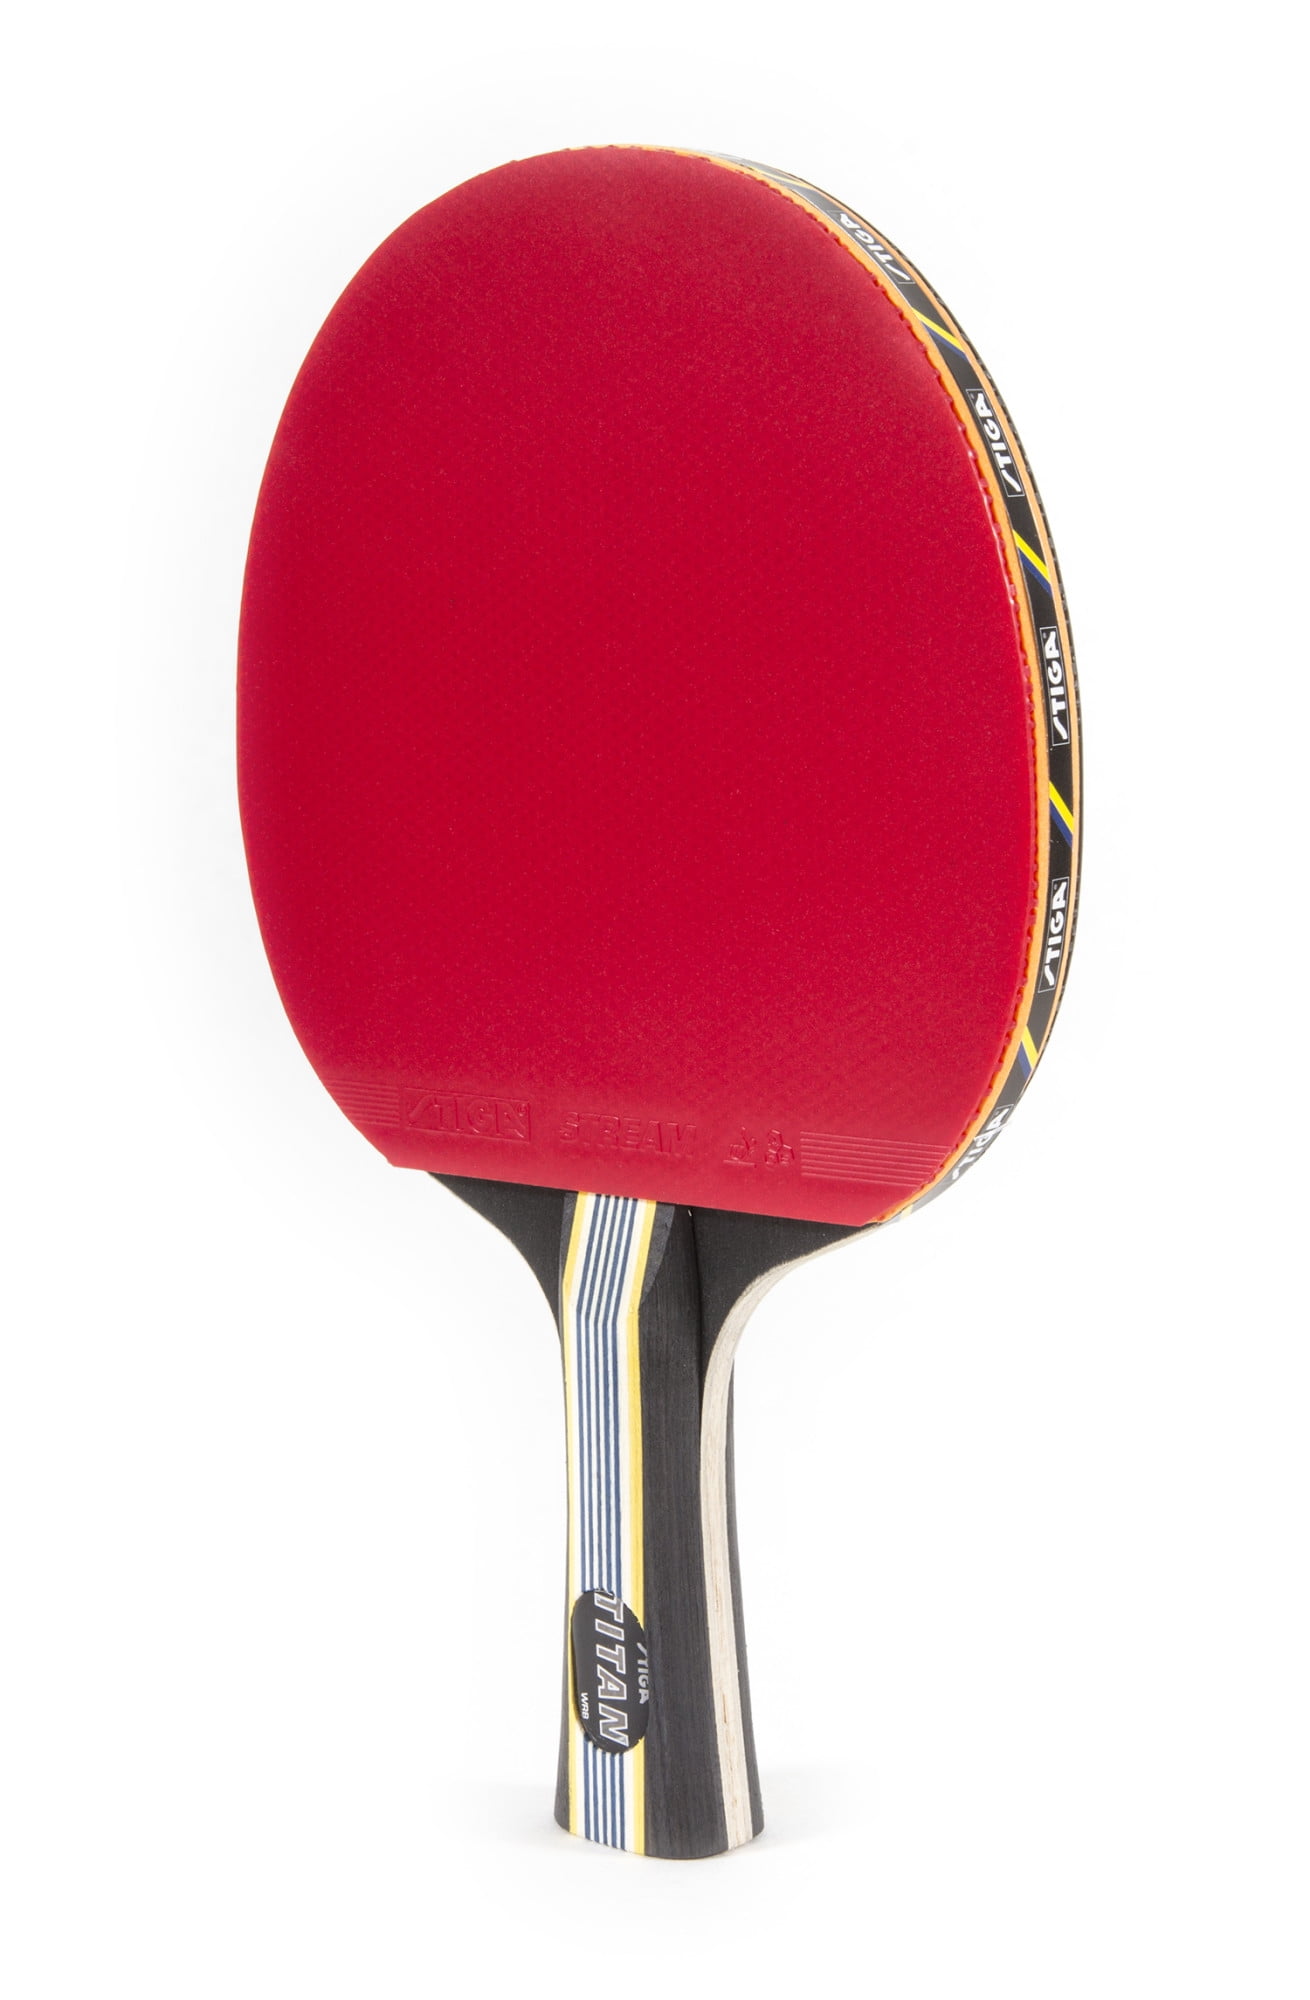 STIGA EVOLUTION Performance-Level Table Tennis Racket w/ Approved Rubber 